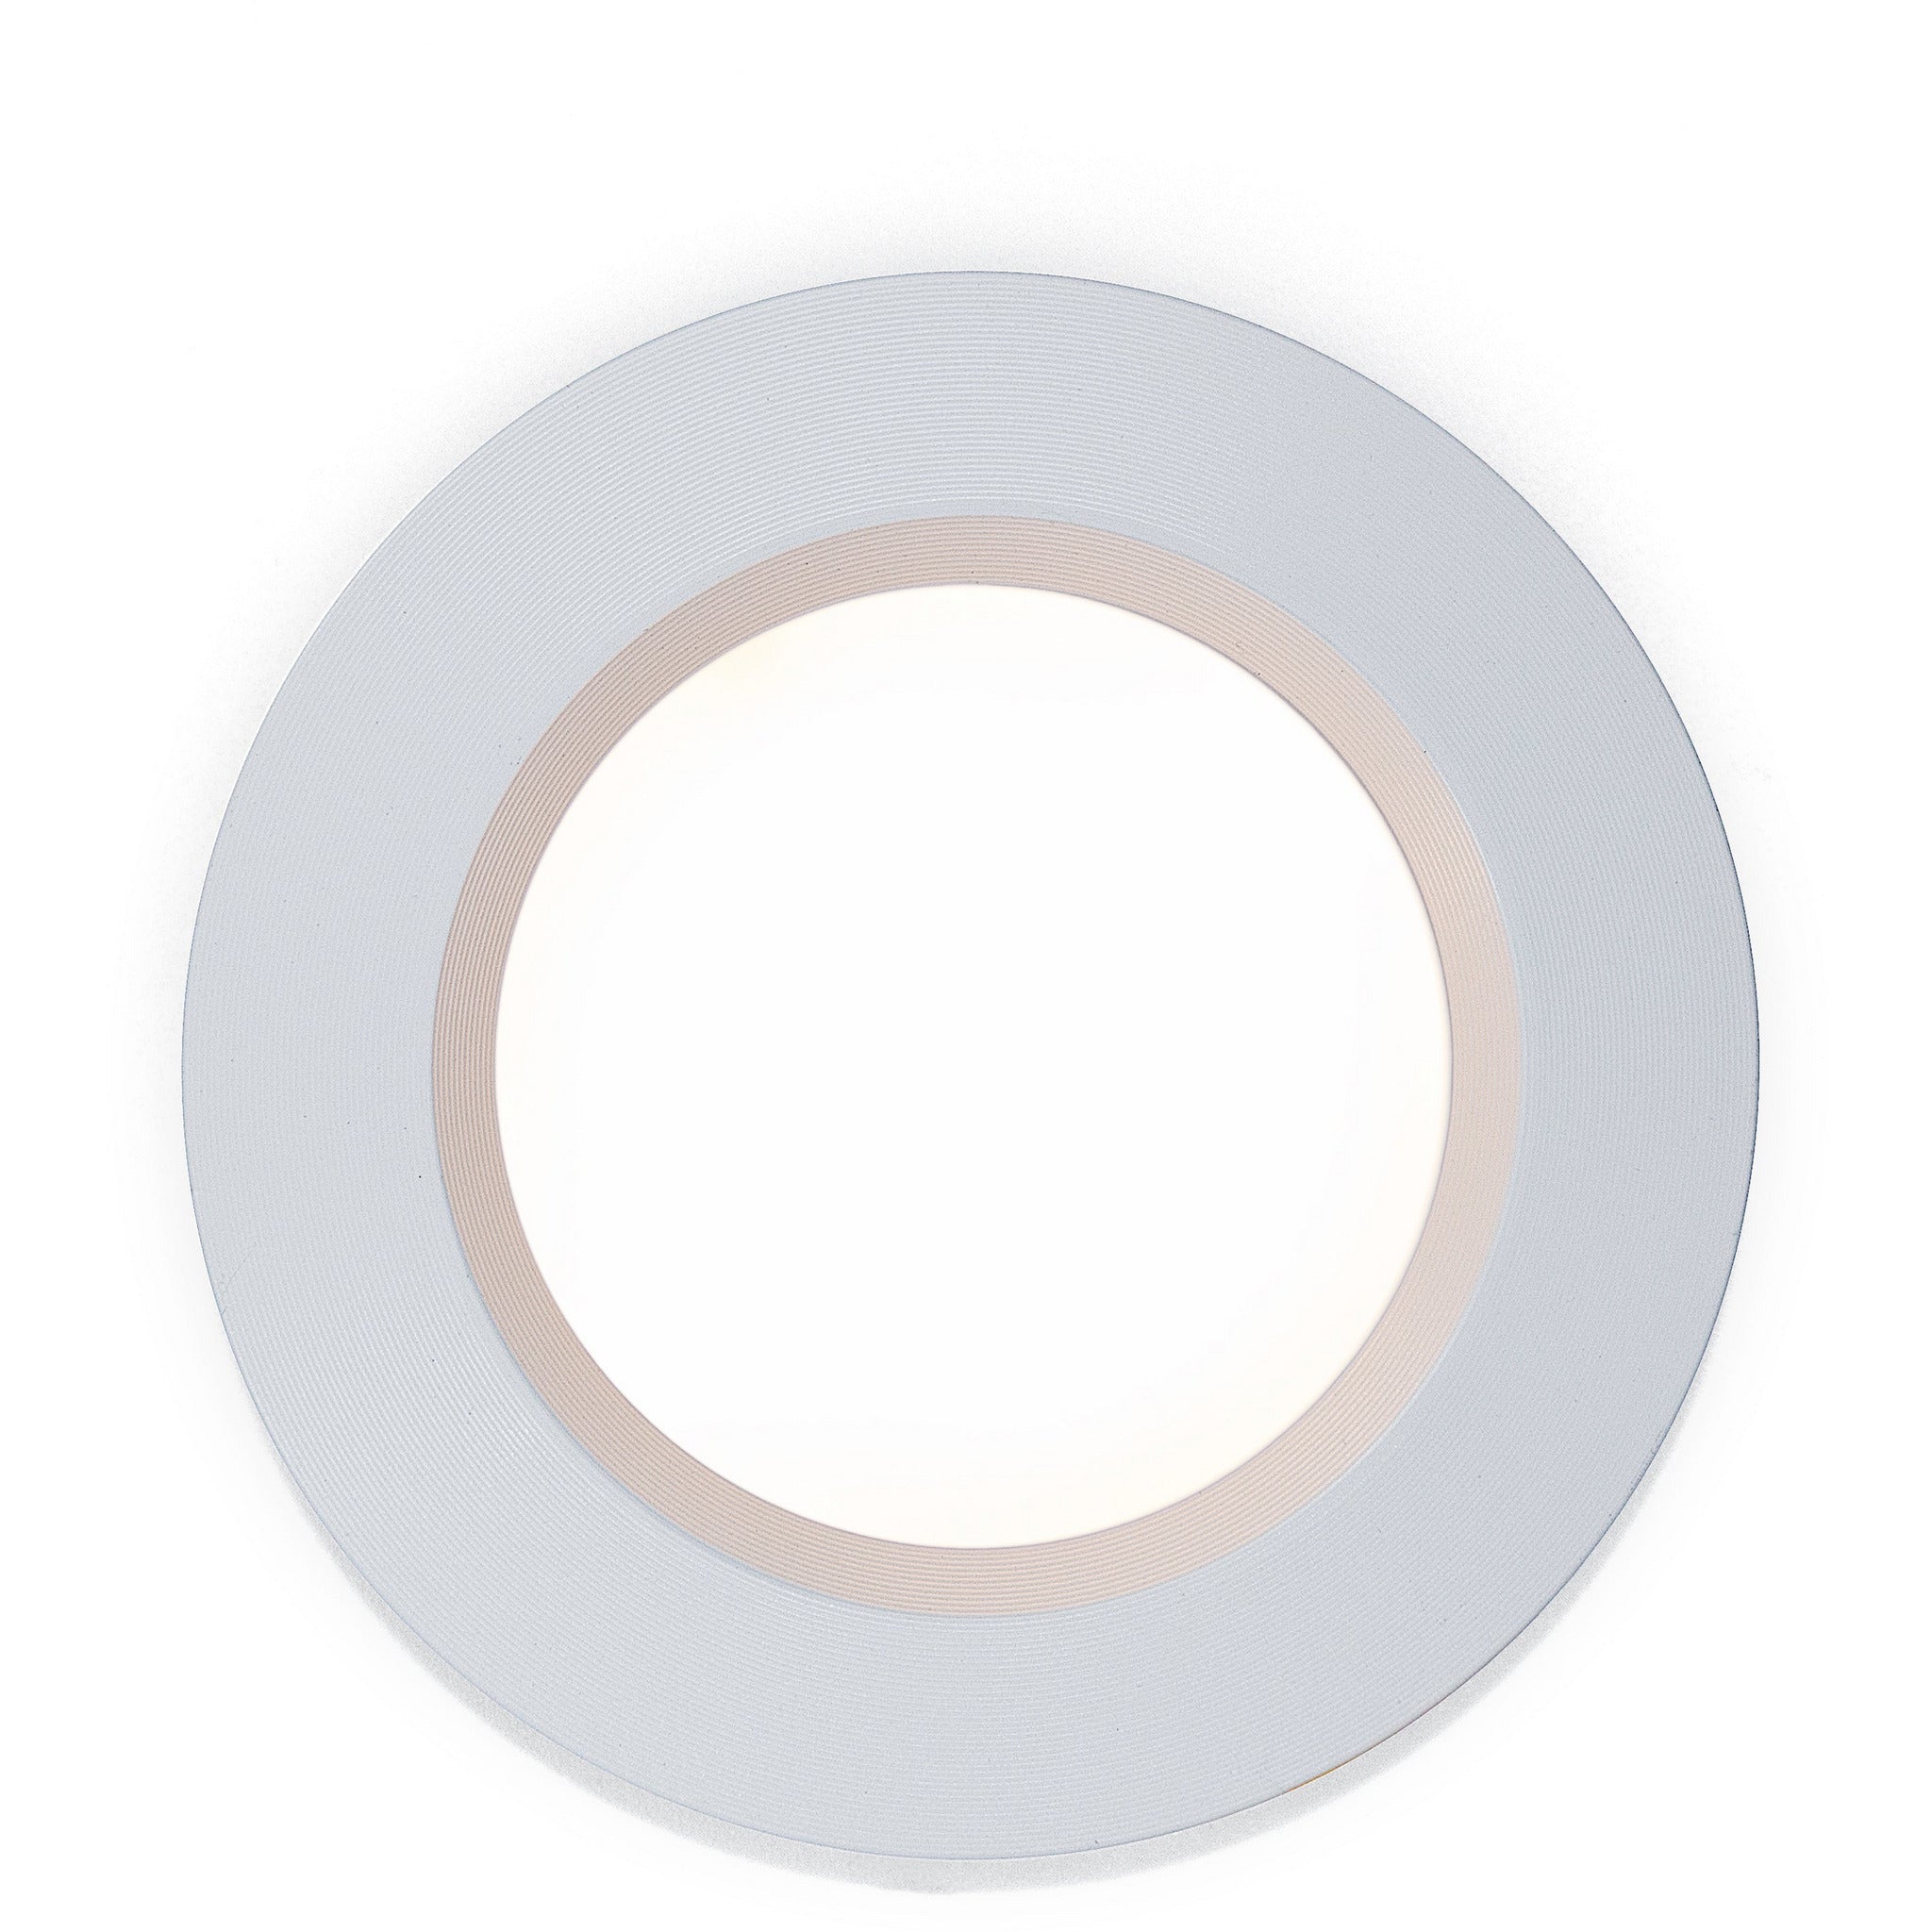 White 3W 18 LED Recessed Light with Frosted Lens - No Switch (Warm White) Kiravans 